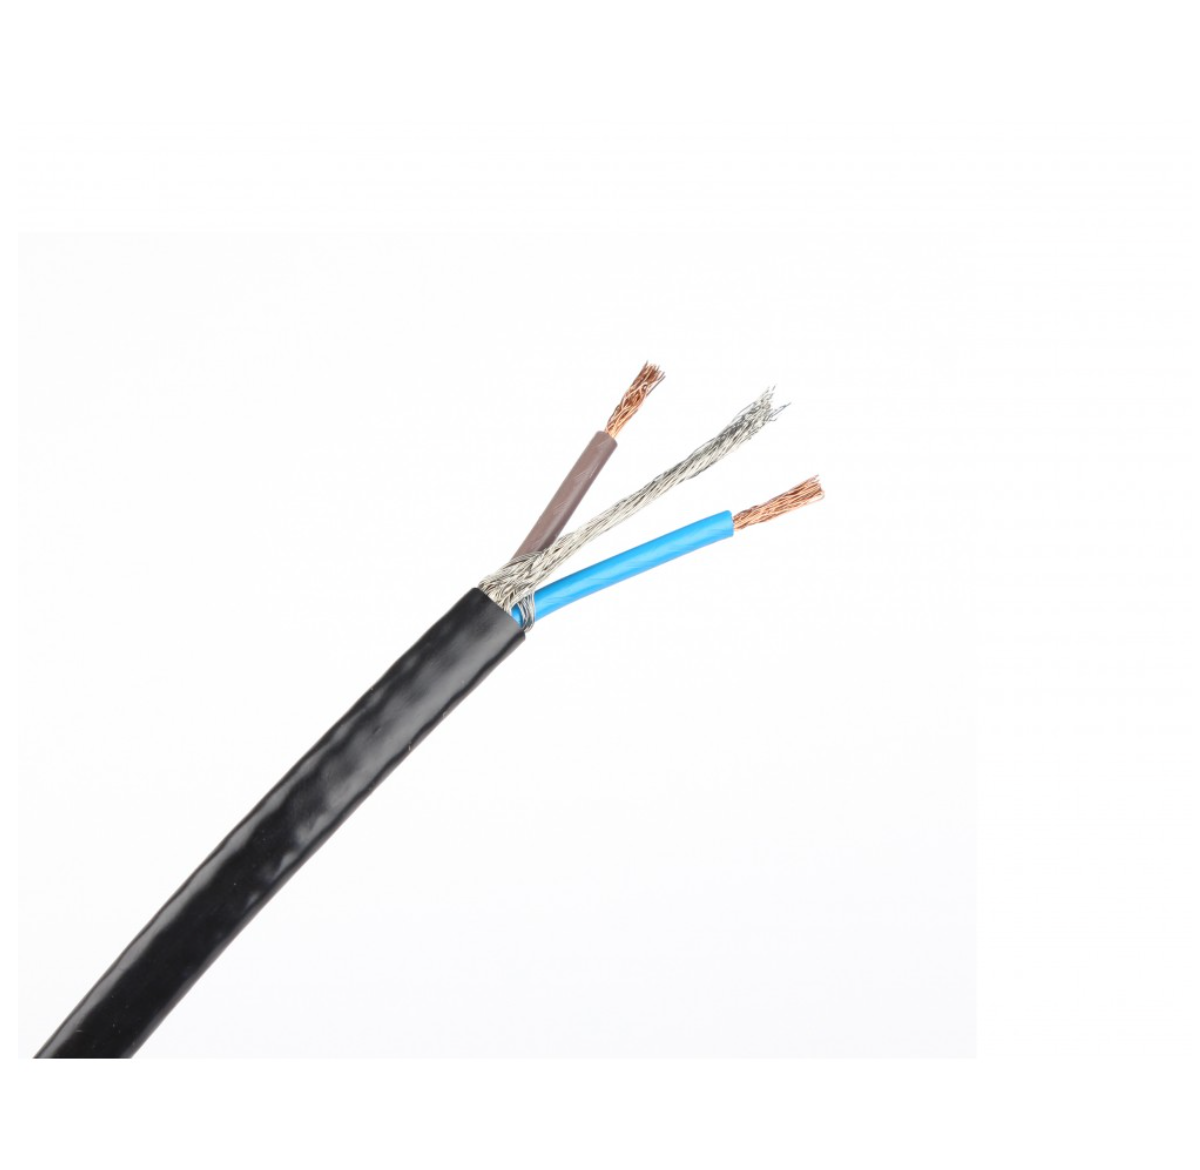 Heating cable - 60m